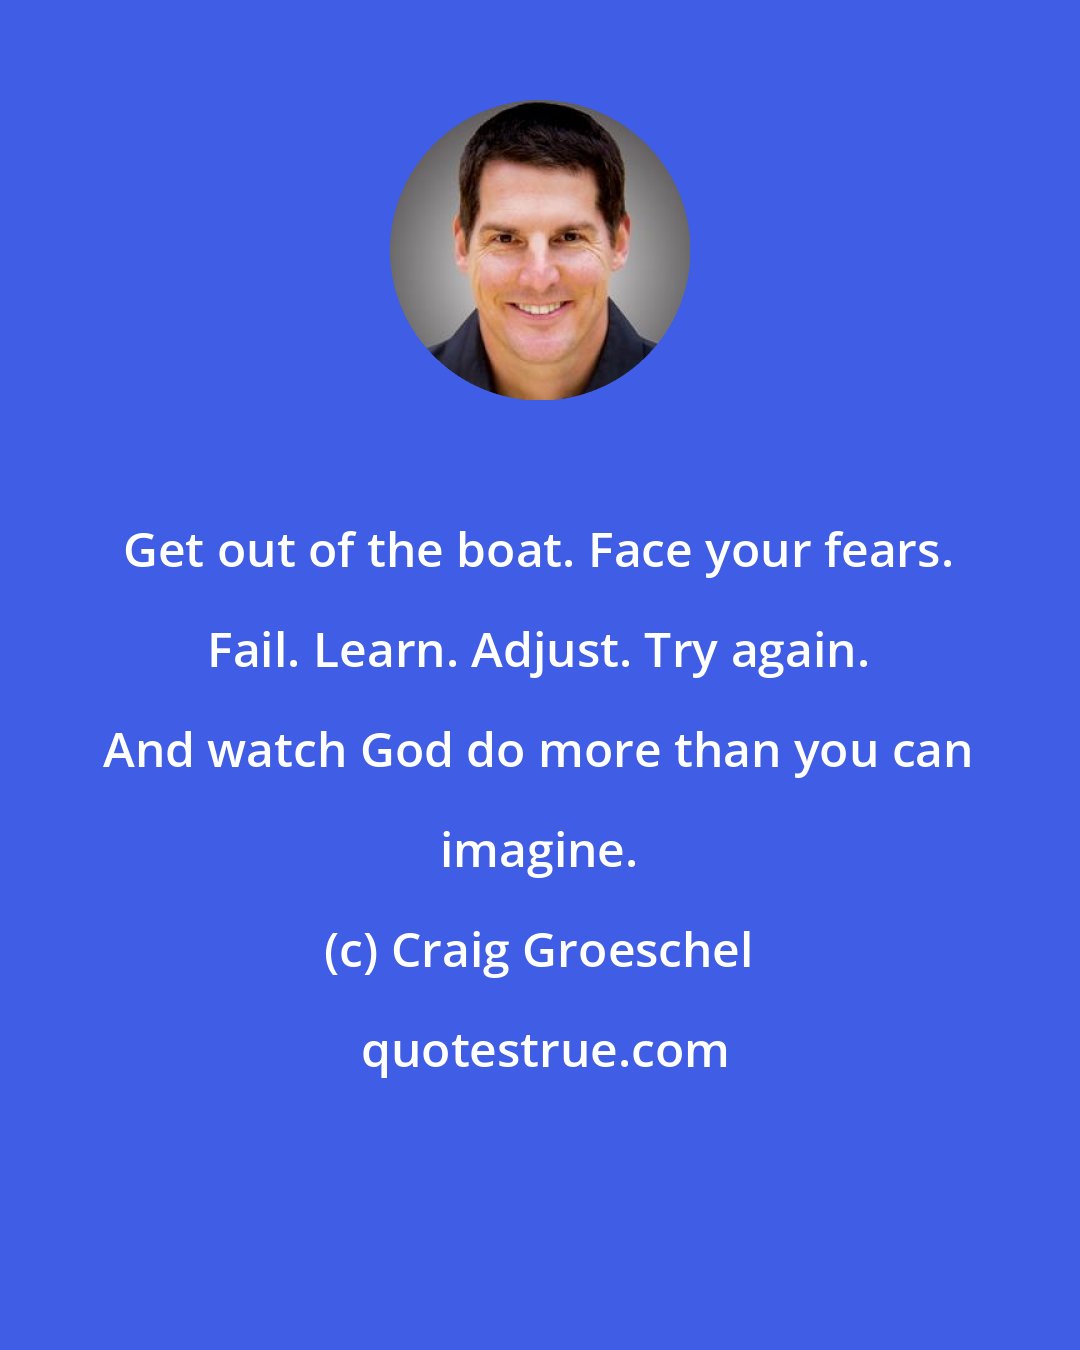 Craig Groeschel: Get out of the boat. Face your fears. Fail. Learn. Adjust. Try again. And watch God do more than you can imagine.